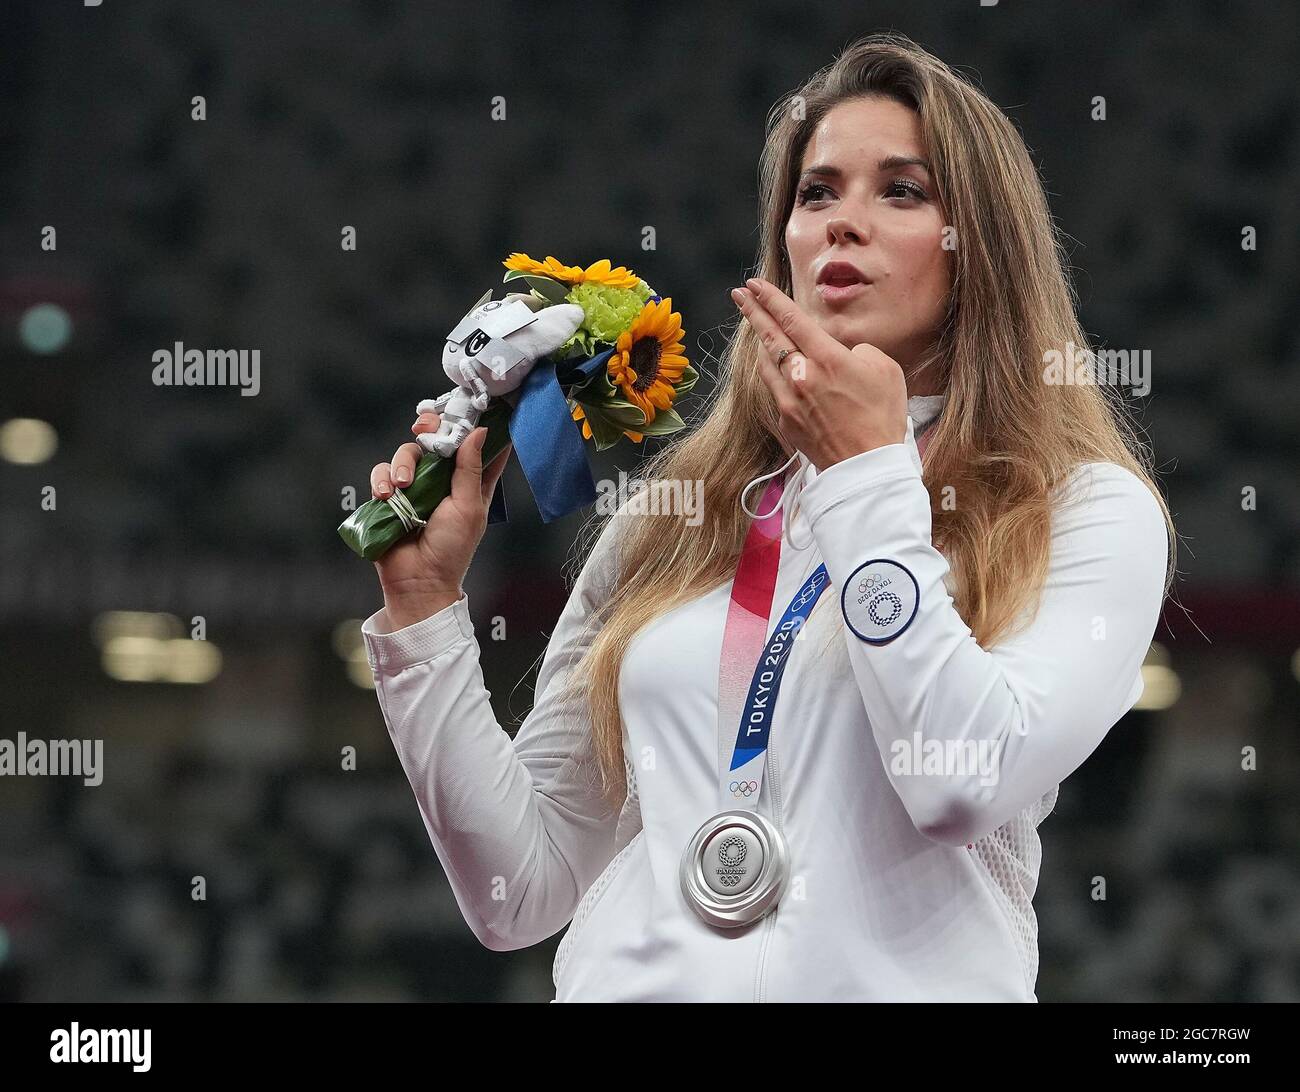 Tokyo, Japan. 7th Aug, 2021. Maria Andrejczyk of Poland reacts during the awarding ceremony of the Women's Javelin Throw at the Tokyo 2020 Olympic Games in Tokyo, Japan, Aug. 7, 2021. Credit: Lui Siu Wai/Xinhua/Alamy Live News Stock Photo